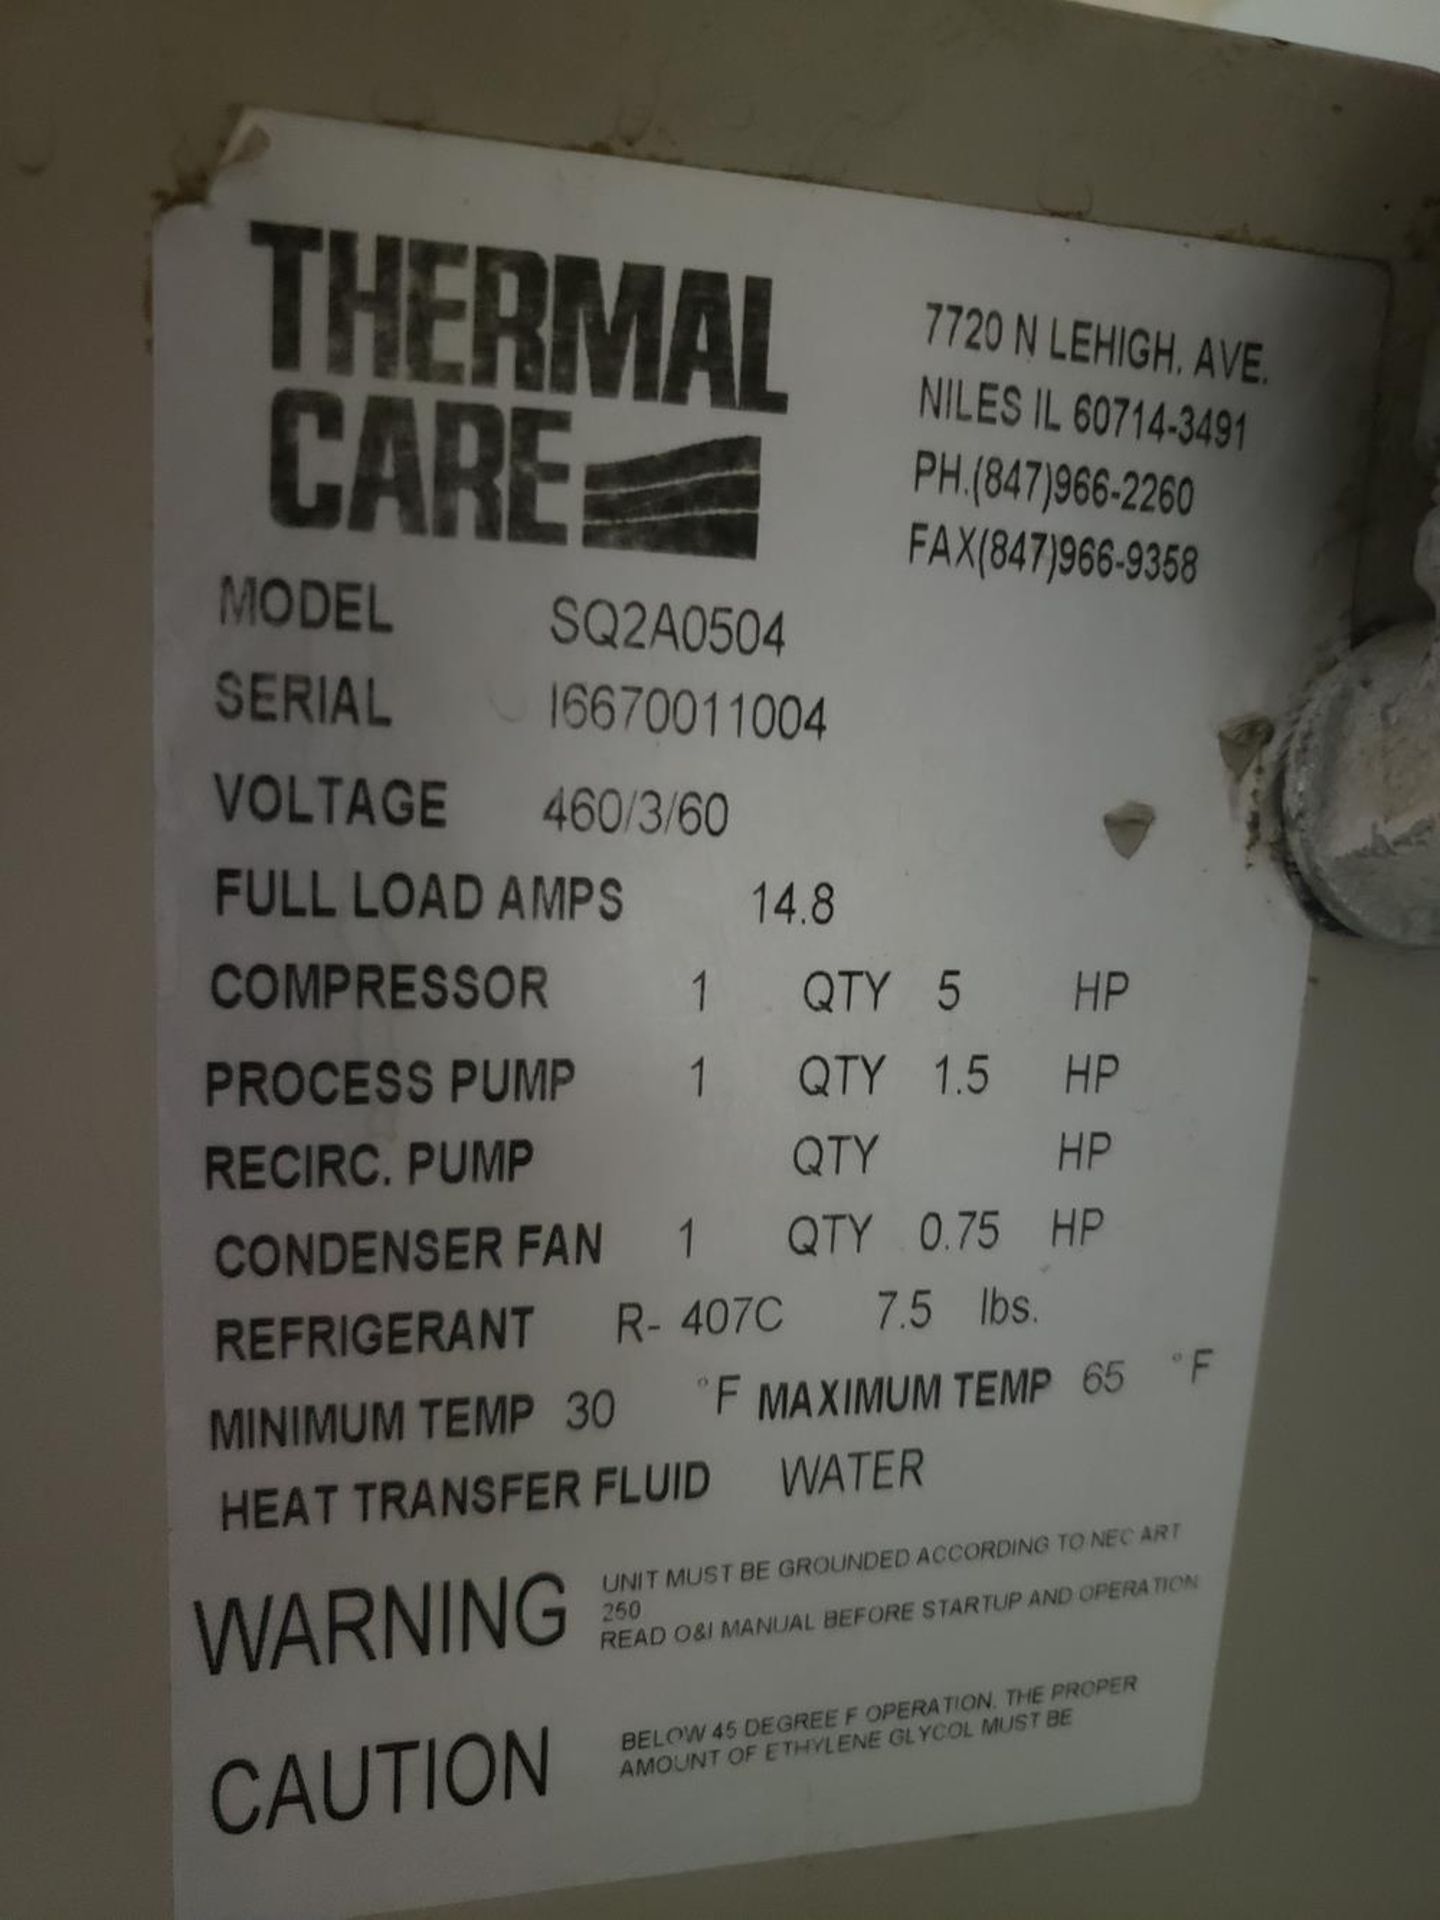 Thermal Care Water Chiller, M# SQ2A0504, S/N 16670011004 | Rig Fee $200 - Image 2 of 2